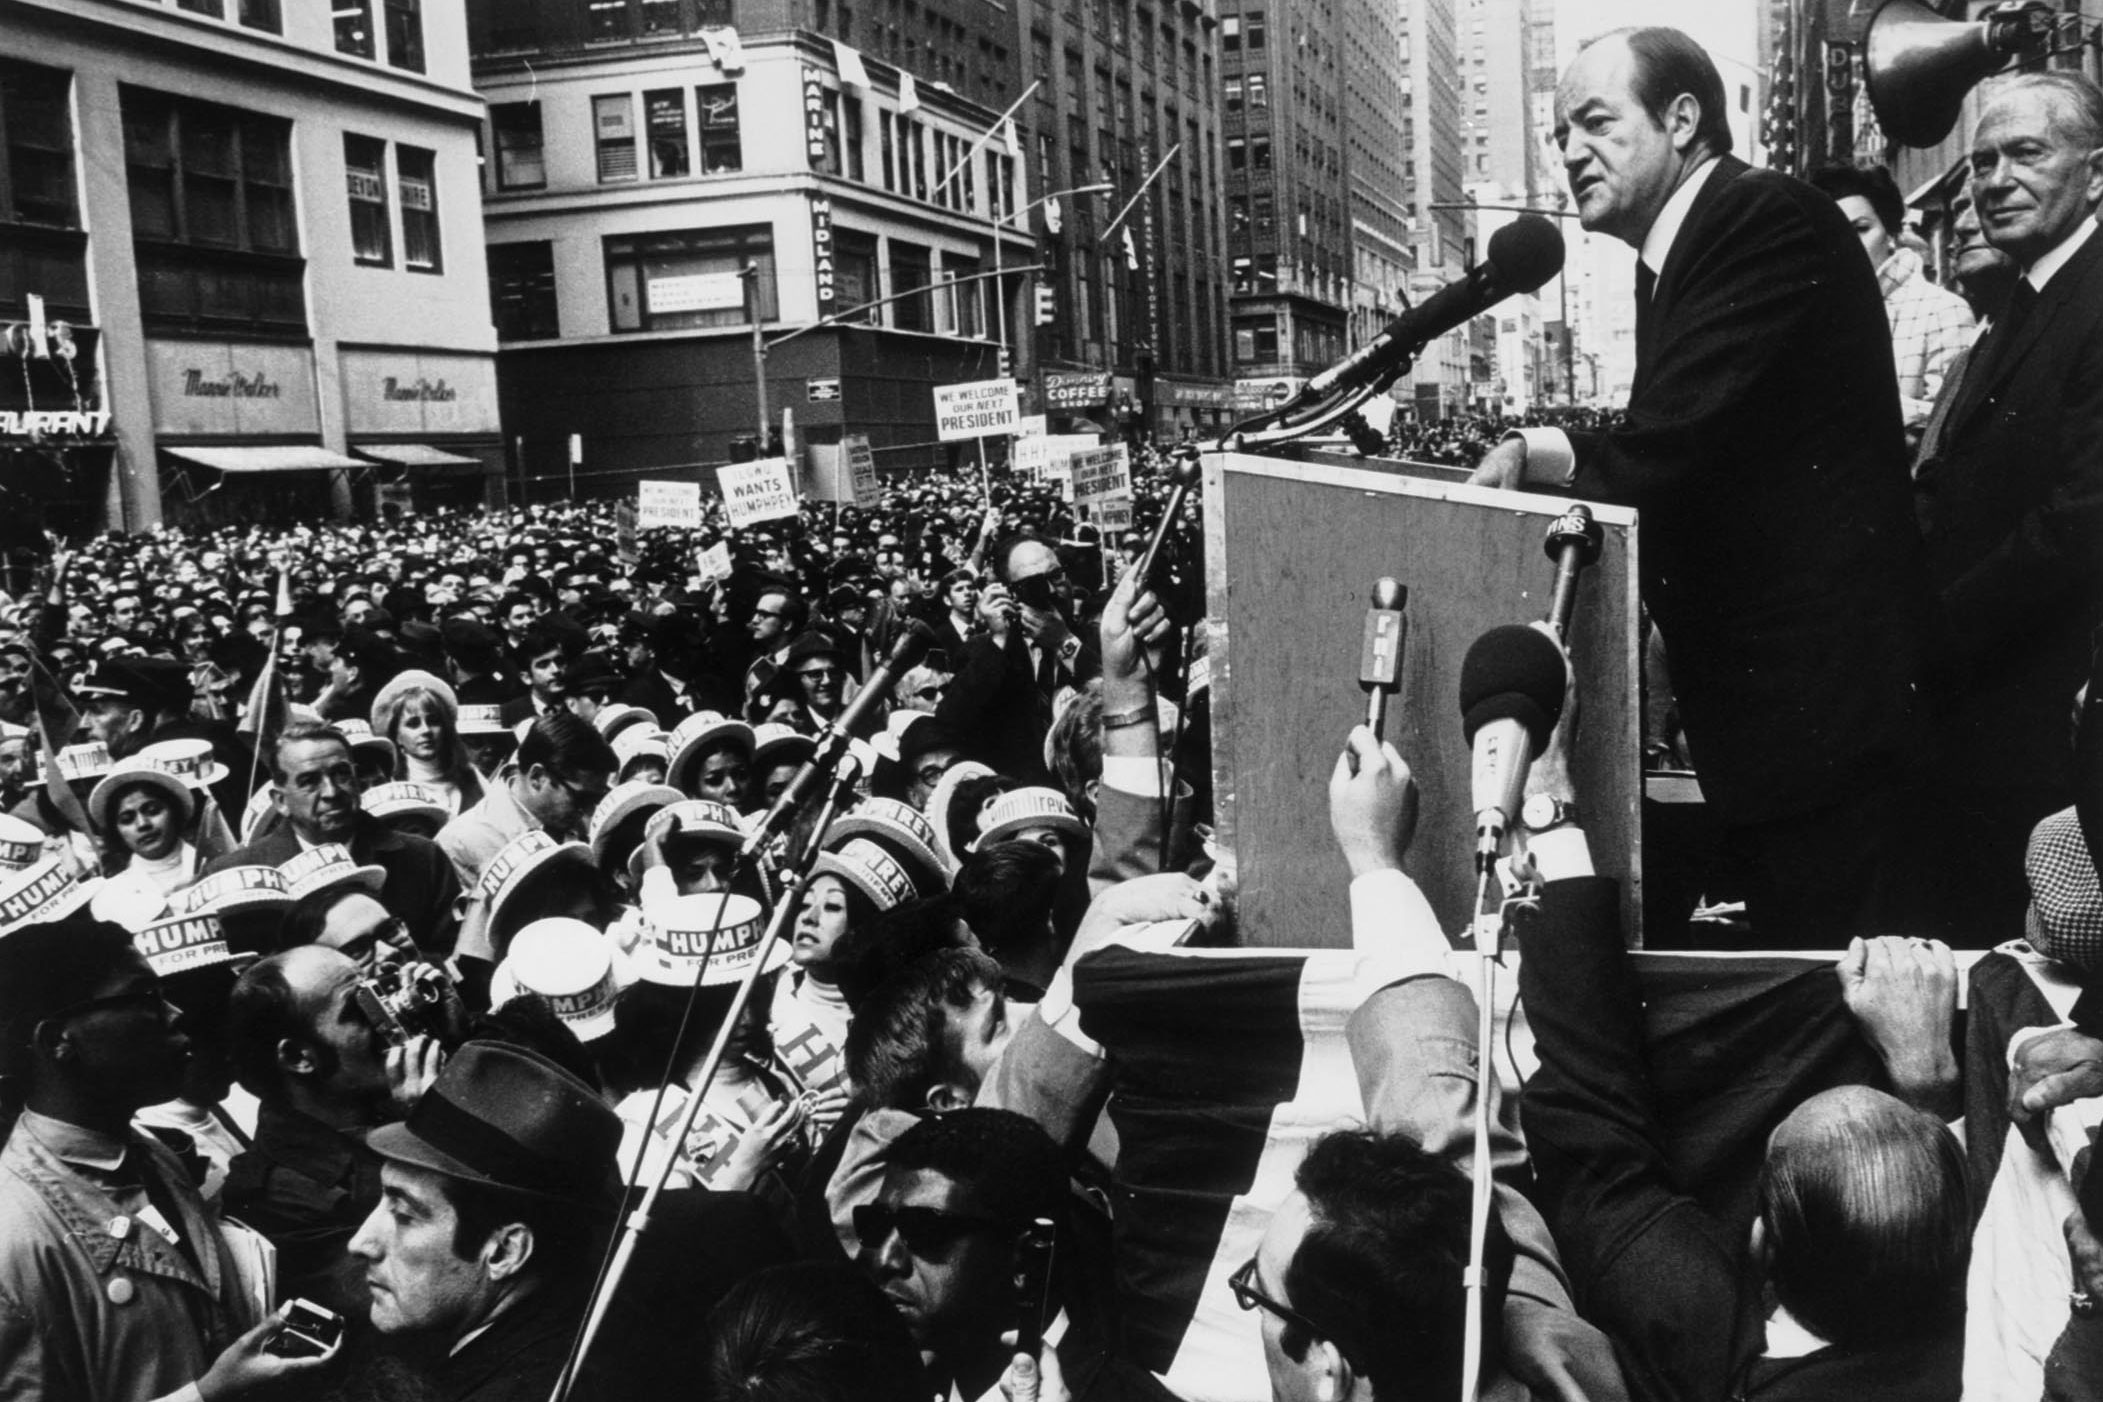 Democrat Hubert H. Humphrey speaking at a podium in New York City to a crowd gathered in the streets during his 1968 presidential campaign.